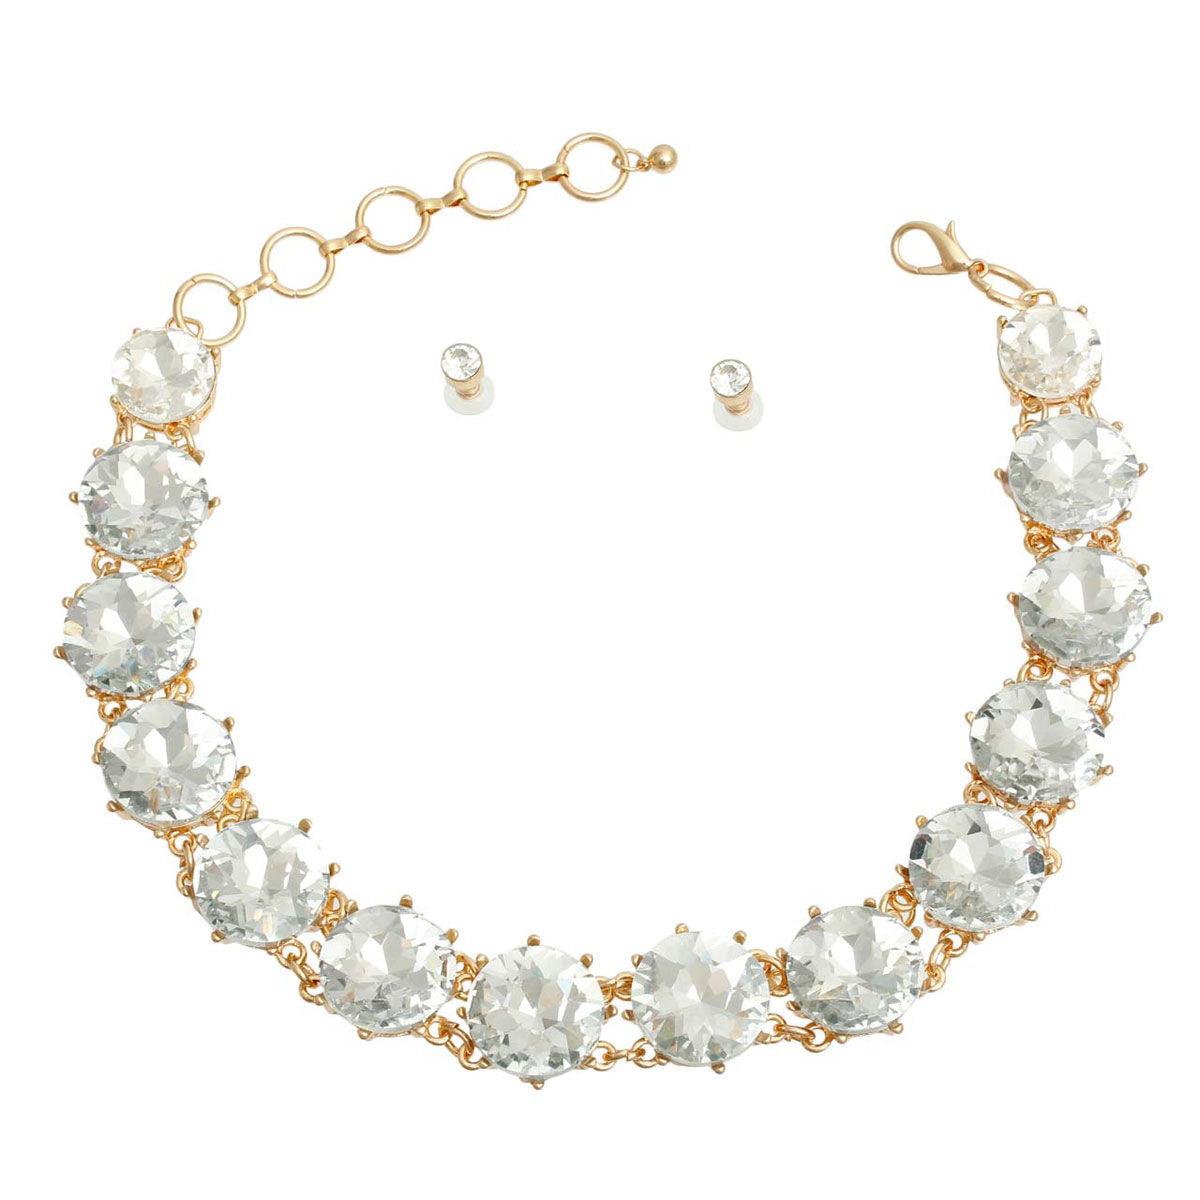 Clearly Chic Statement Link Necklace Set